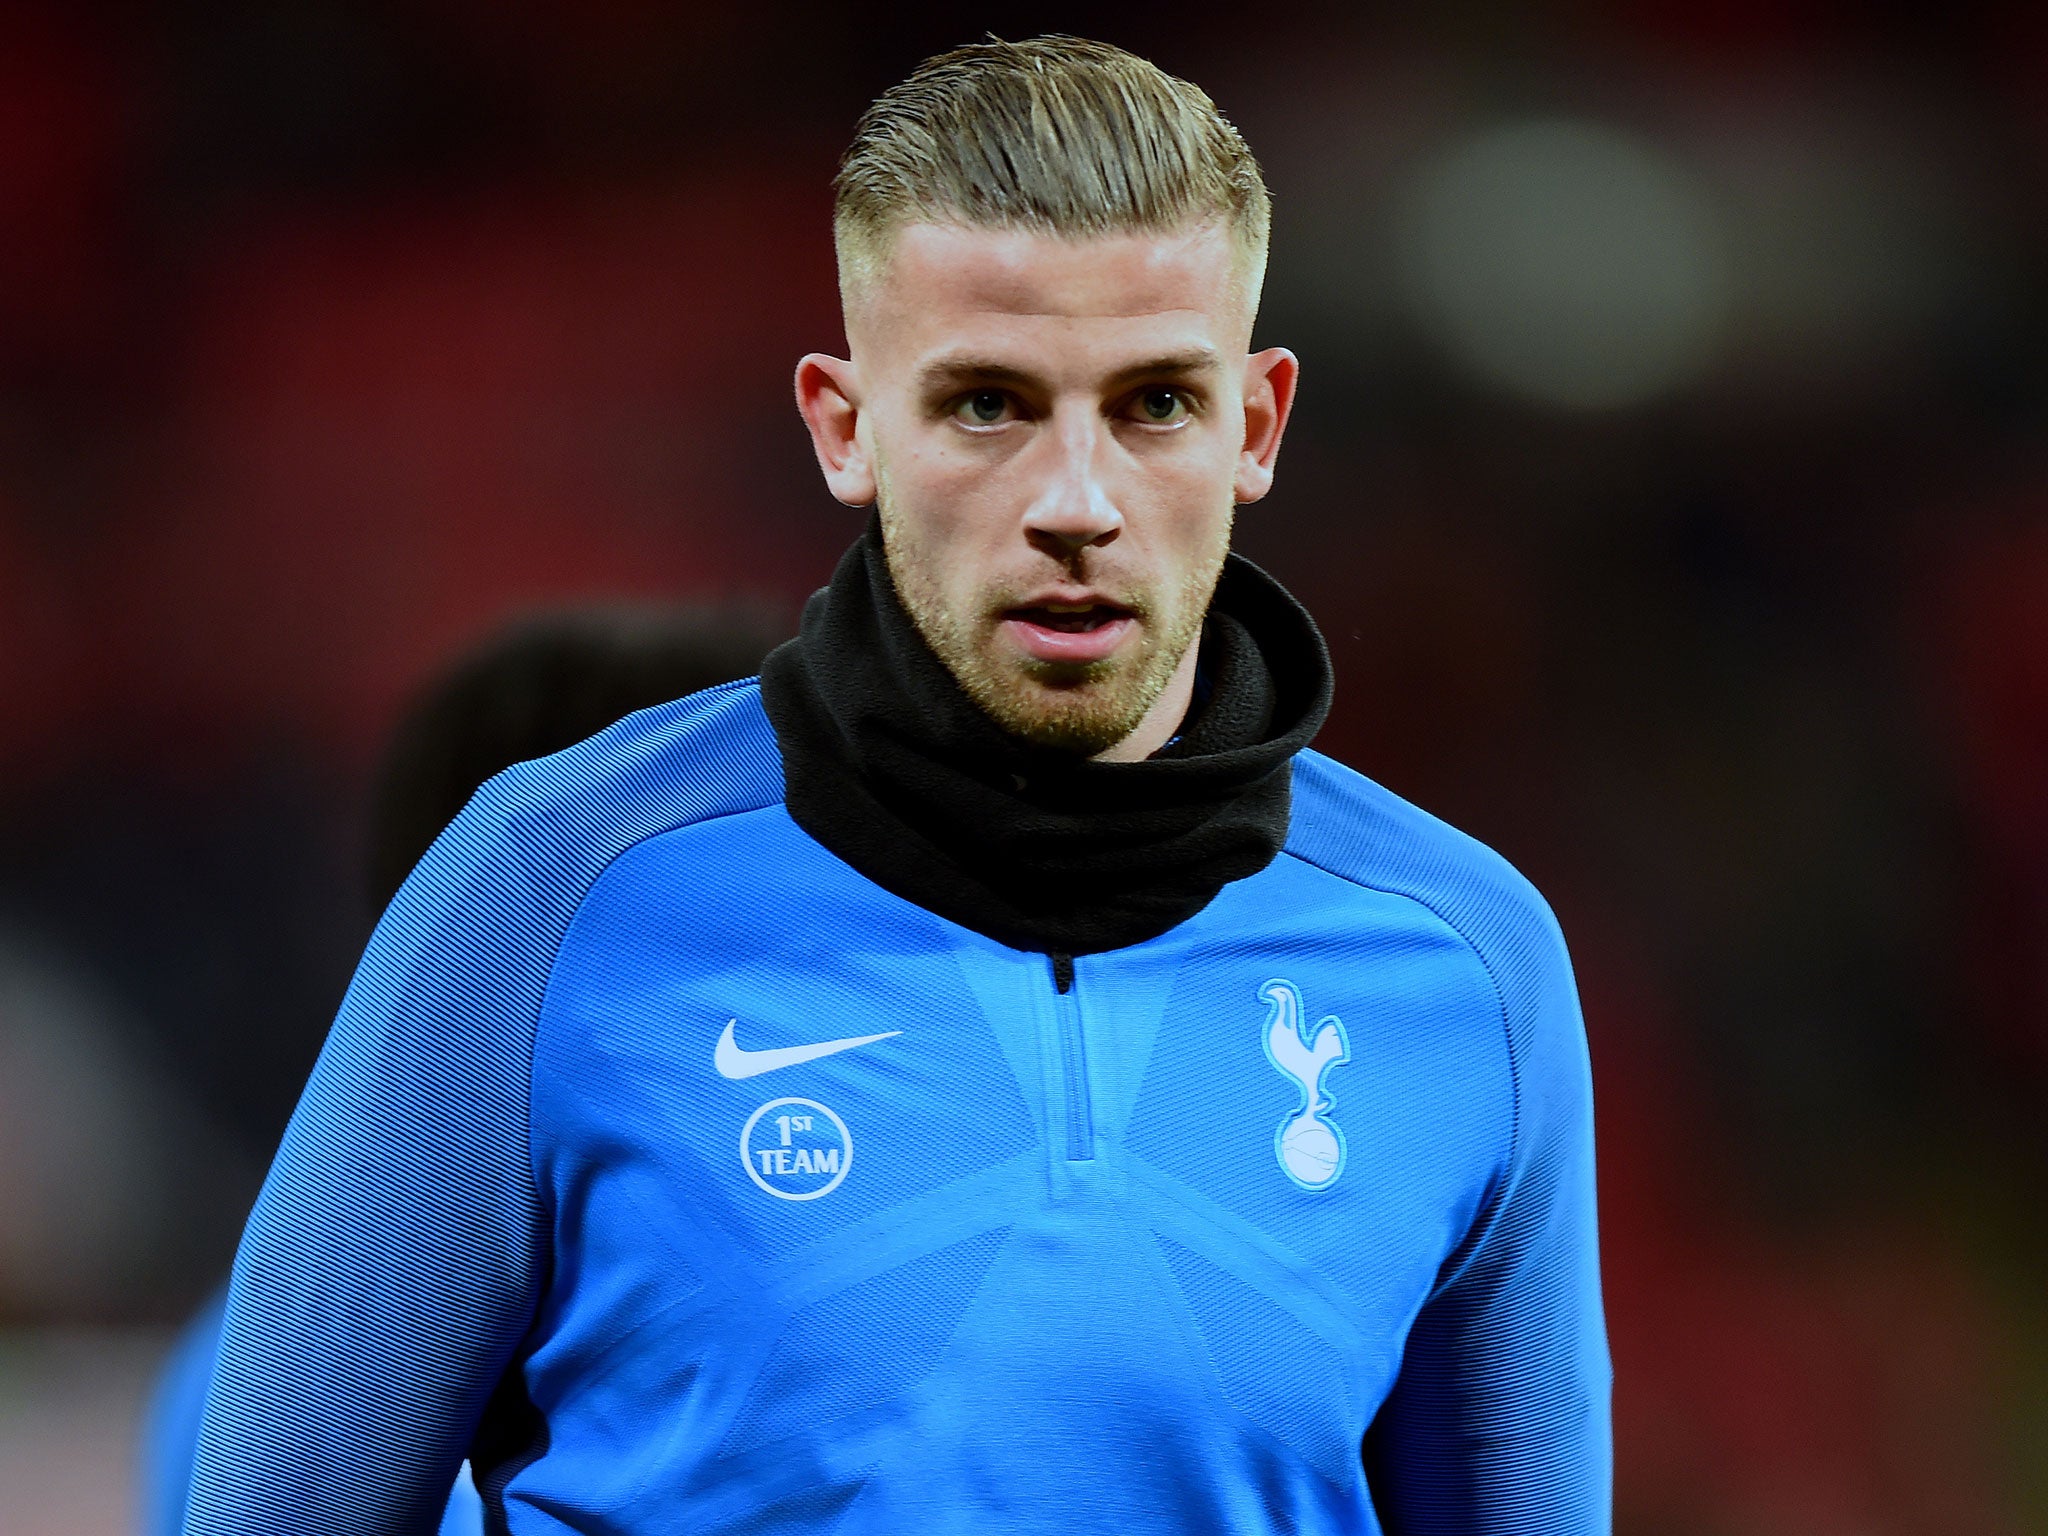 Toby Alderweireld's future at Tottenham remains unclear